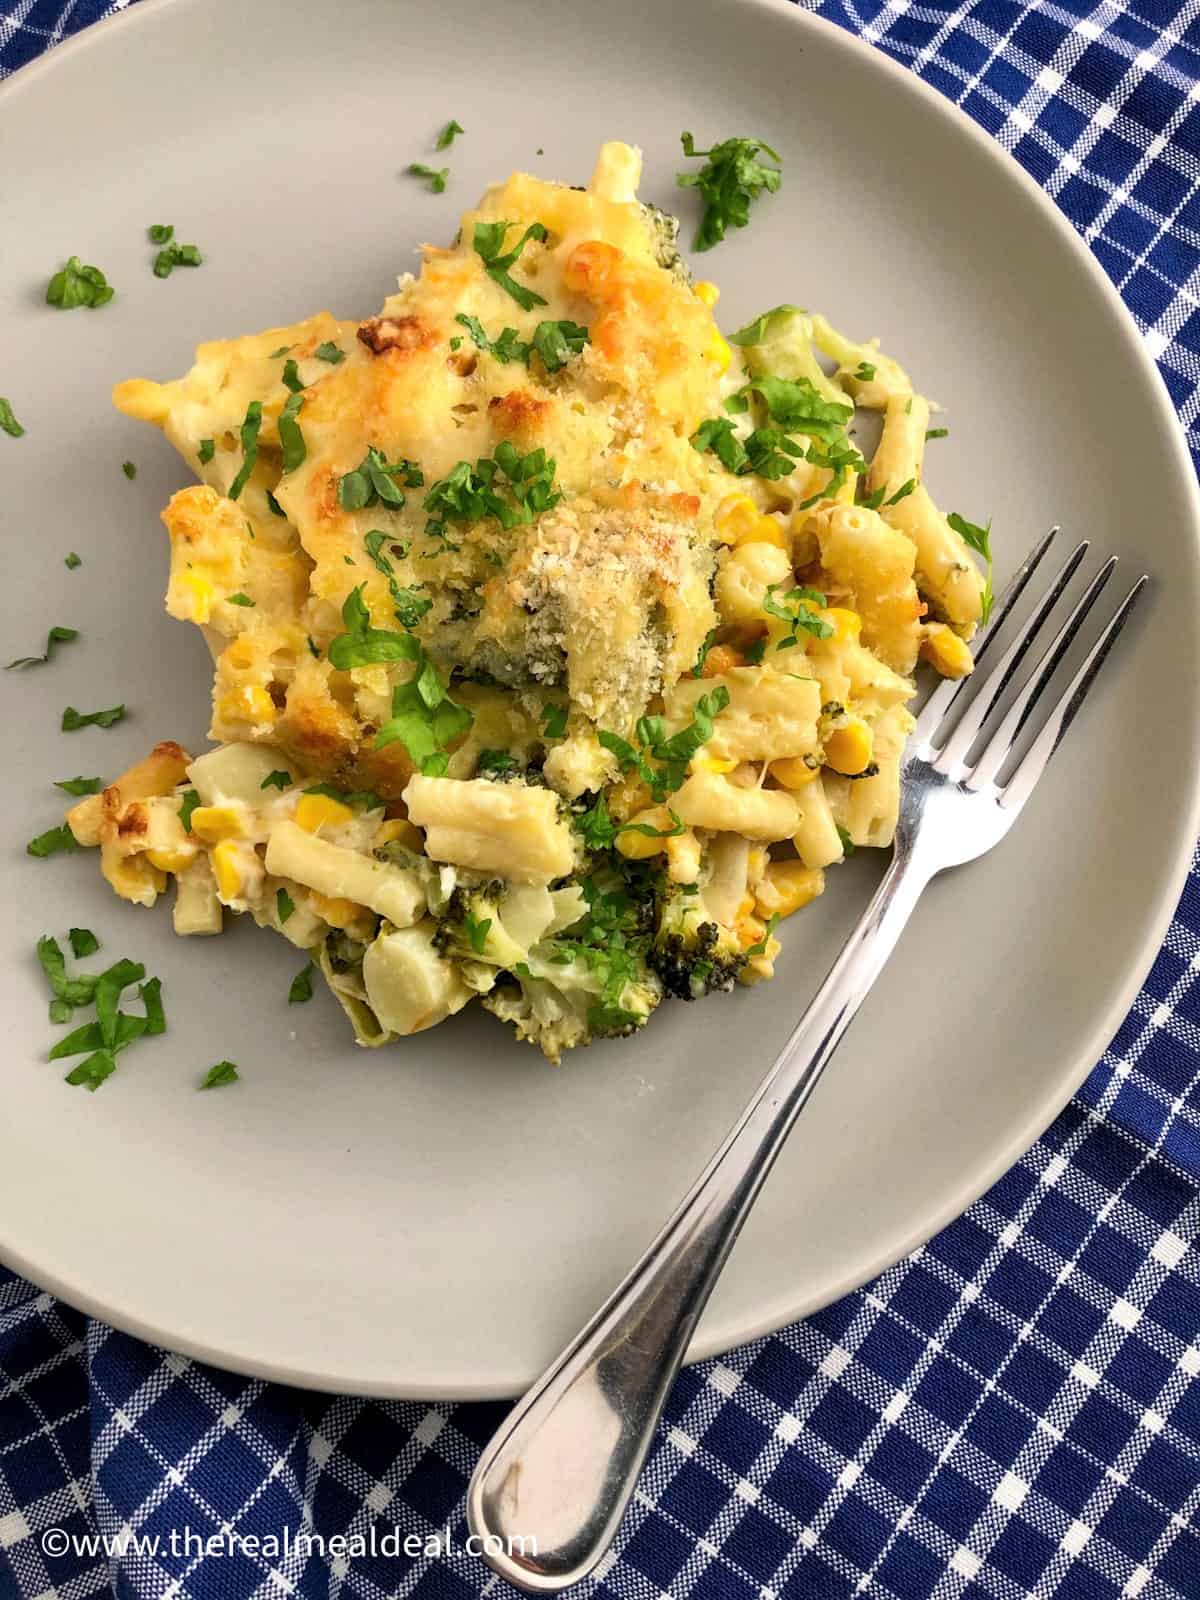 Baked macaroni on a plate with vegetables topped with fresh parsley